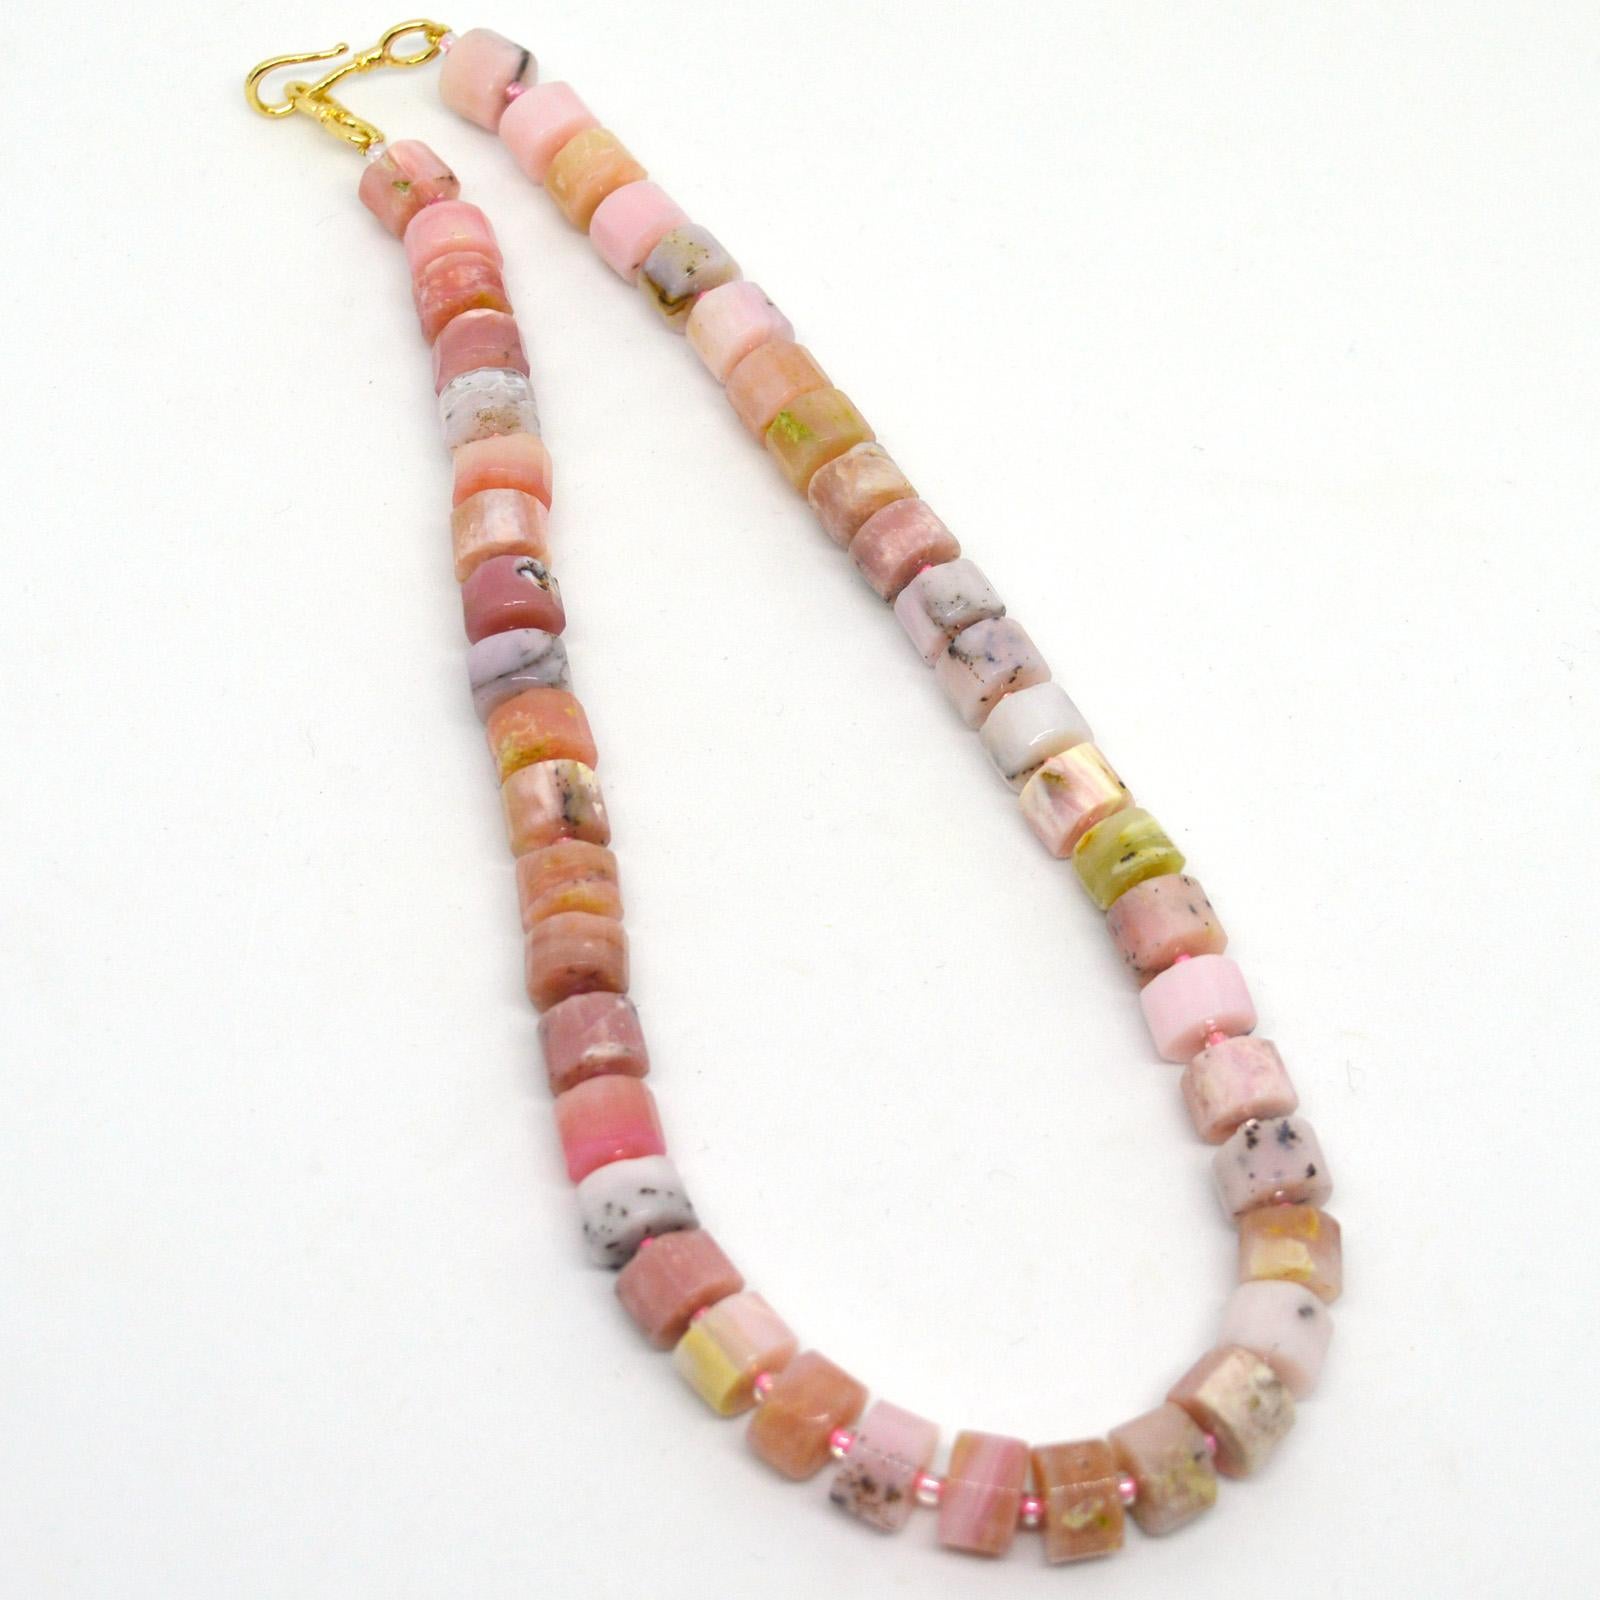 Delicate faceted wheels of Pink Opal stone approx 10x6mm short necklace finished with a easy Gold filled hook clasp.
Finished length is 44.5cm  17.5 inches